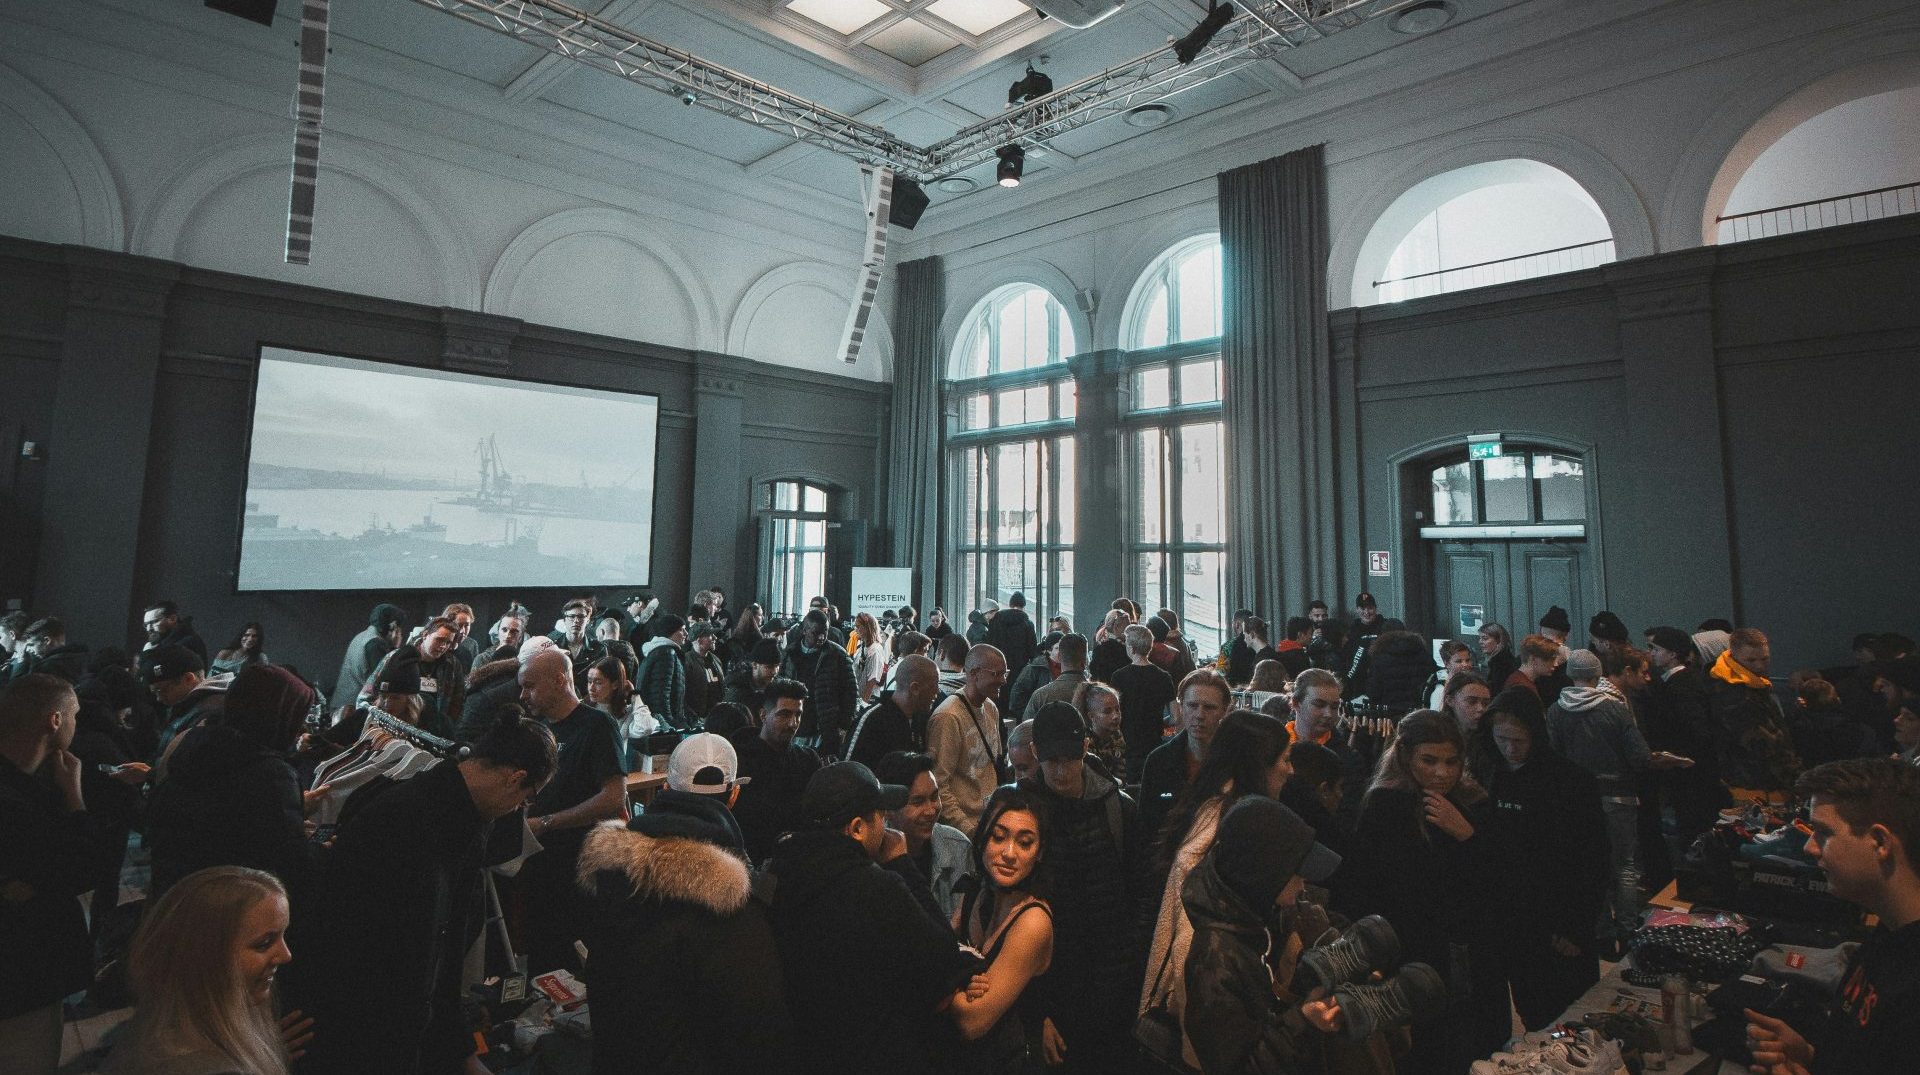 A crowded conference room. Events and experiences are proving to be a bright spot during tough times for publishers and digital media outlets. Photo by Jakob Dallbjorn from Unsplash.